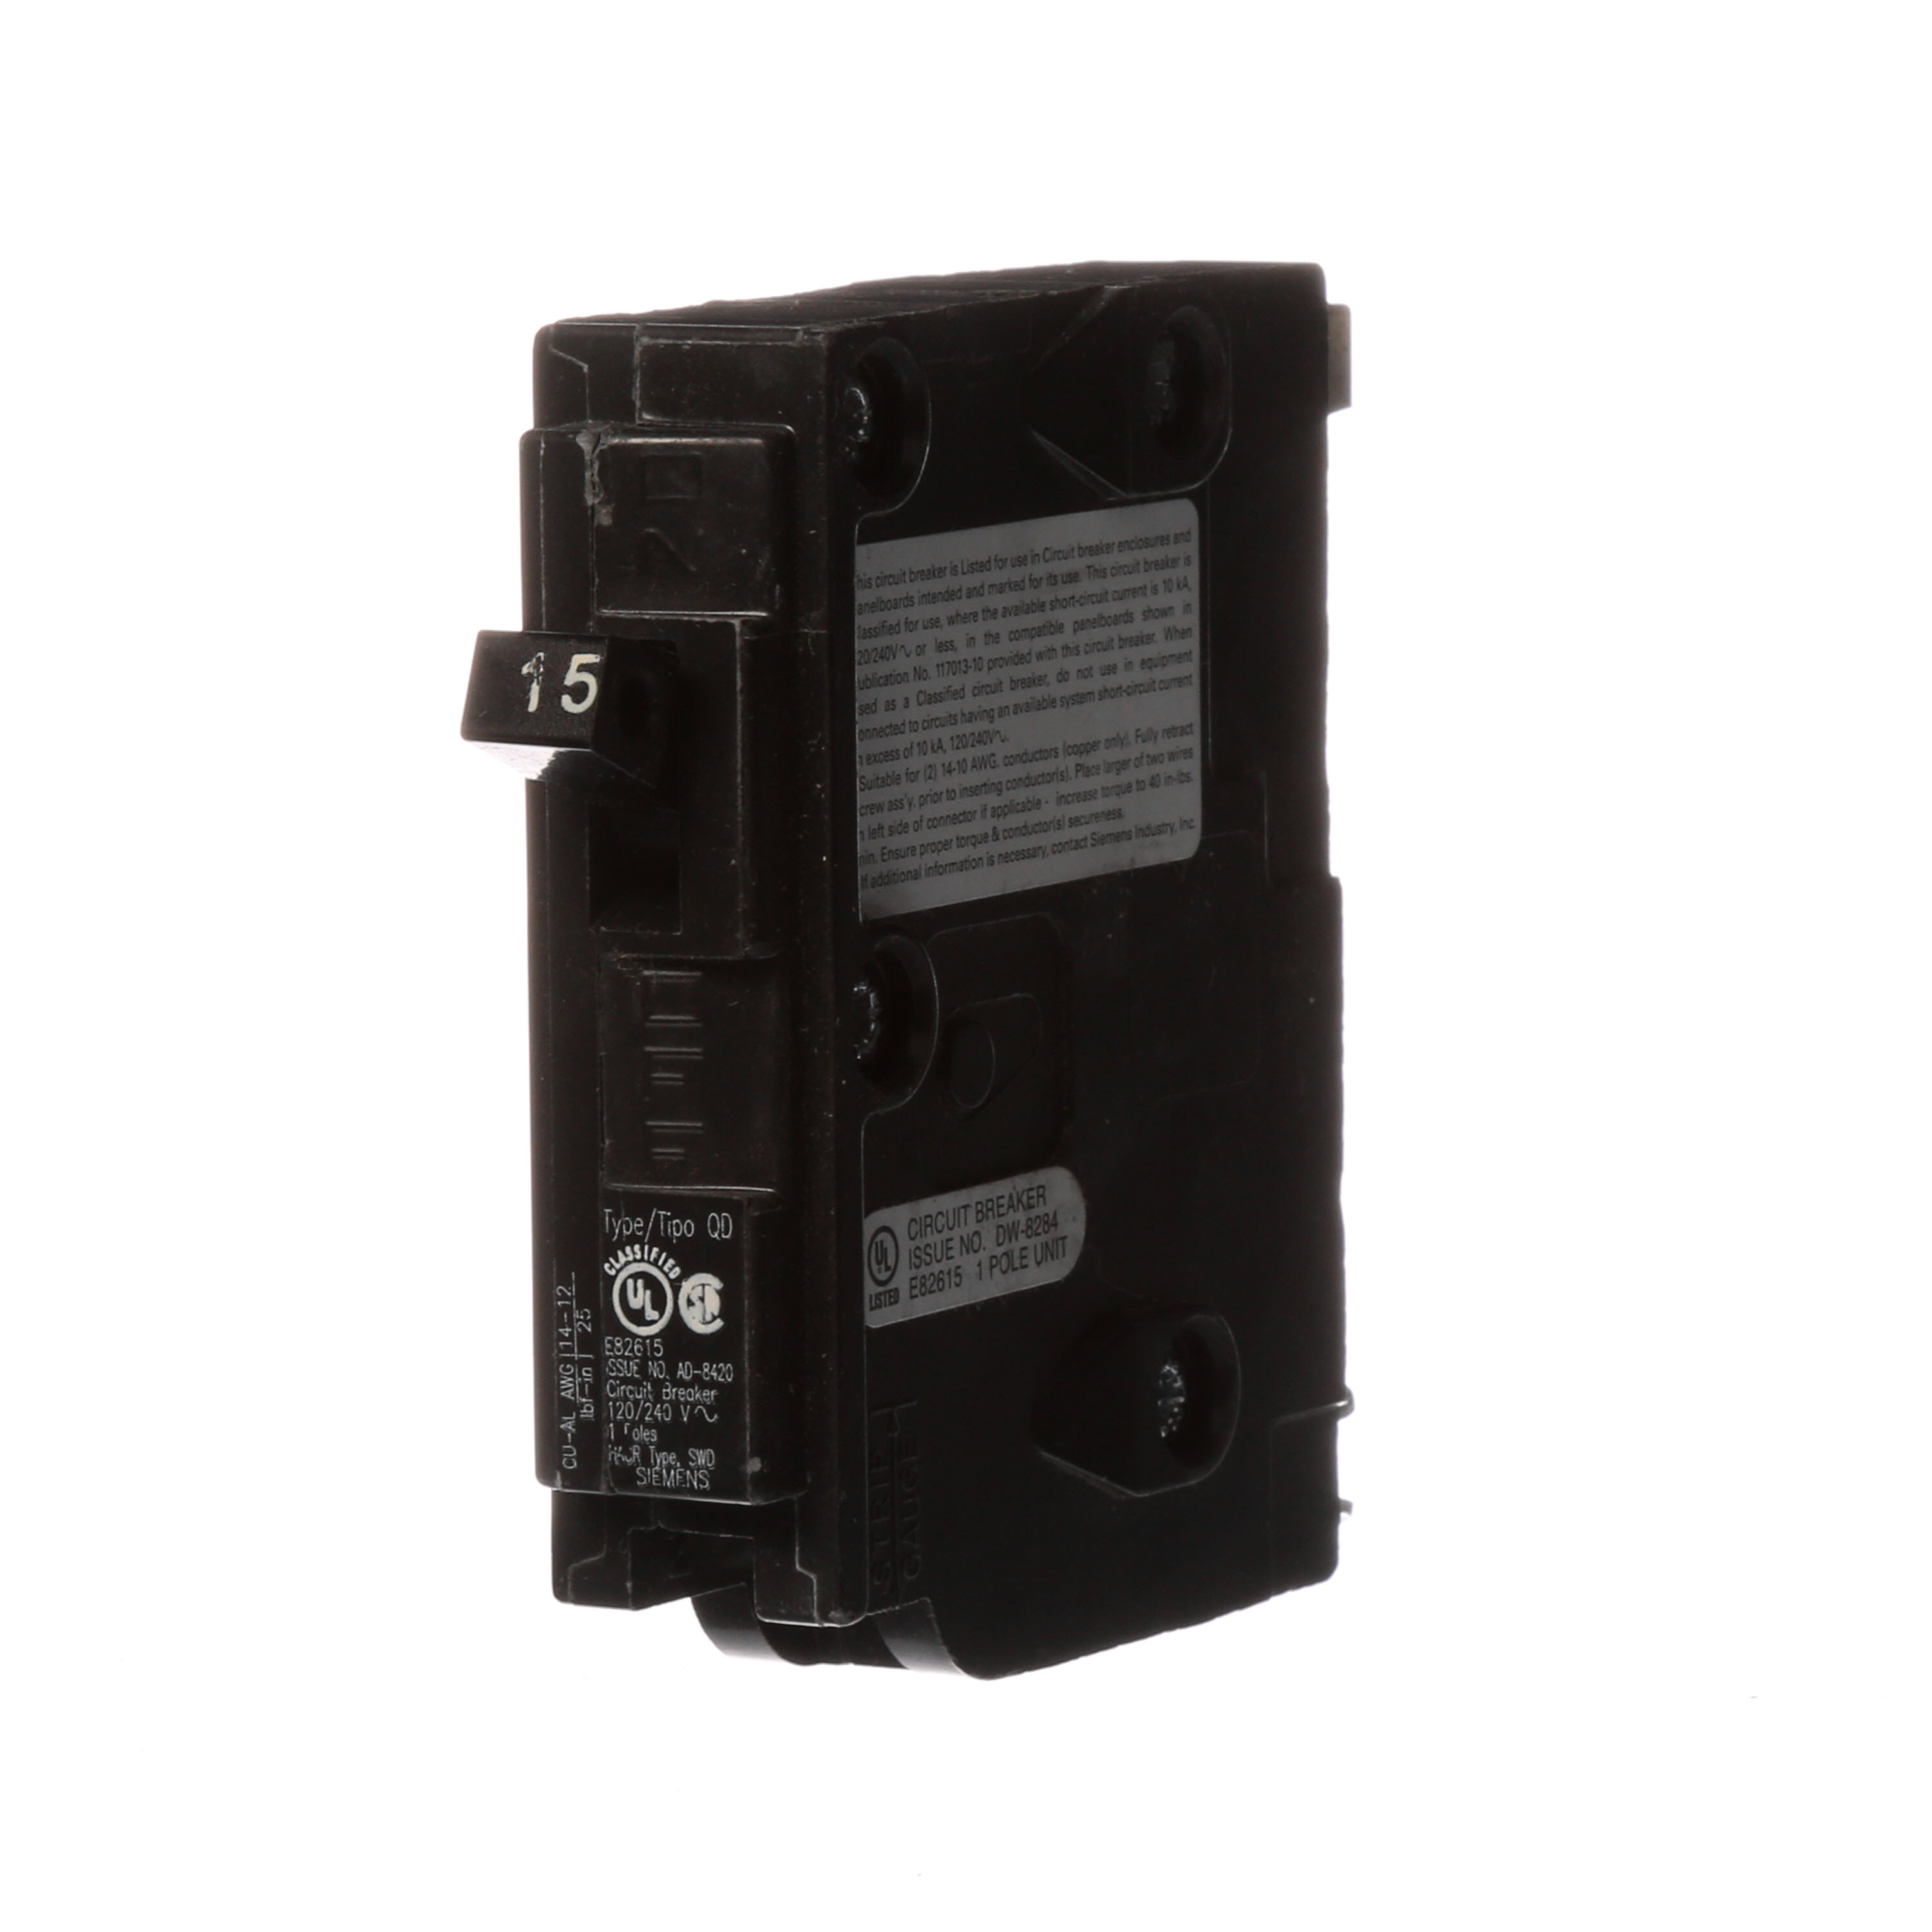 Siemens Low Voltage Residential Circuit Breakers. QD 3/4 IN Plug-In 1-Pole circuit breaker. Rated 120V (15A) AIR (10 kA). Special features HACR rated, UL listed and classified.